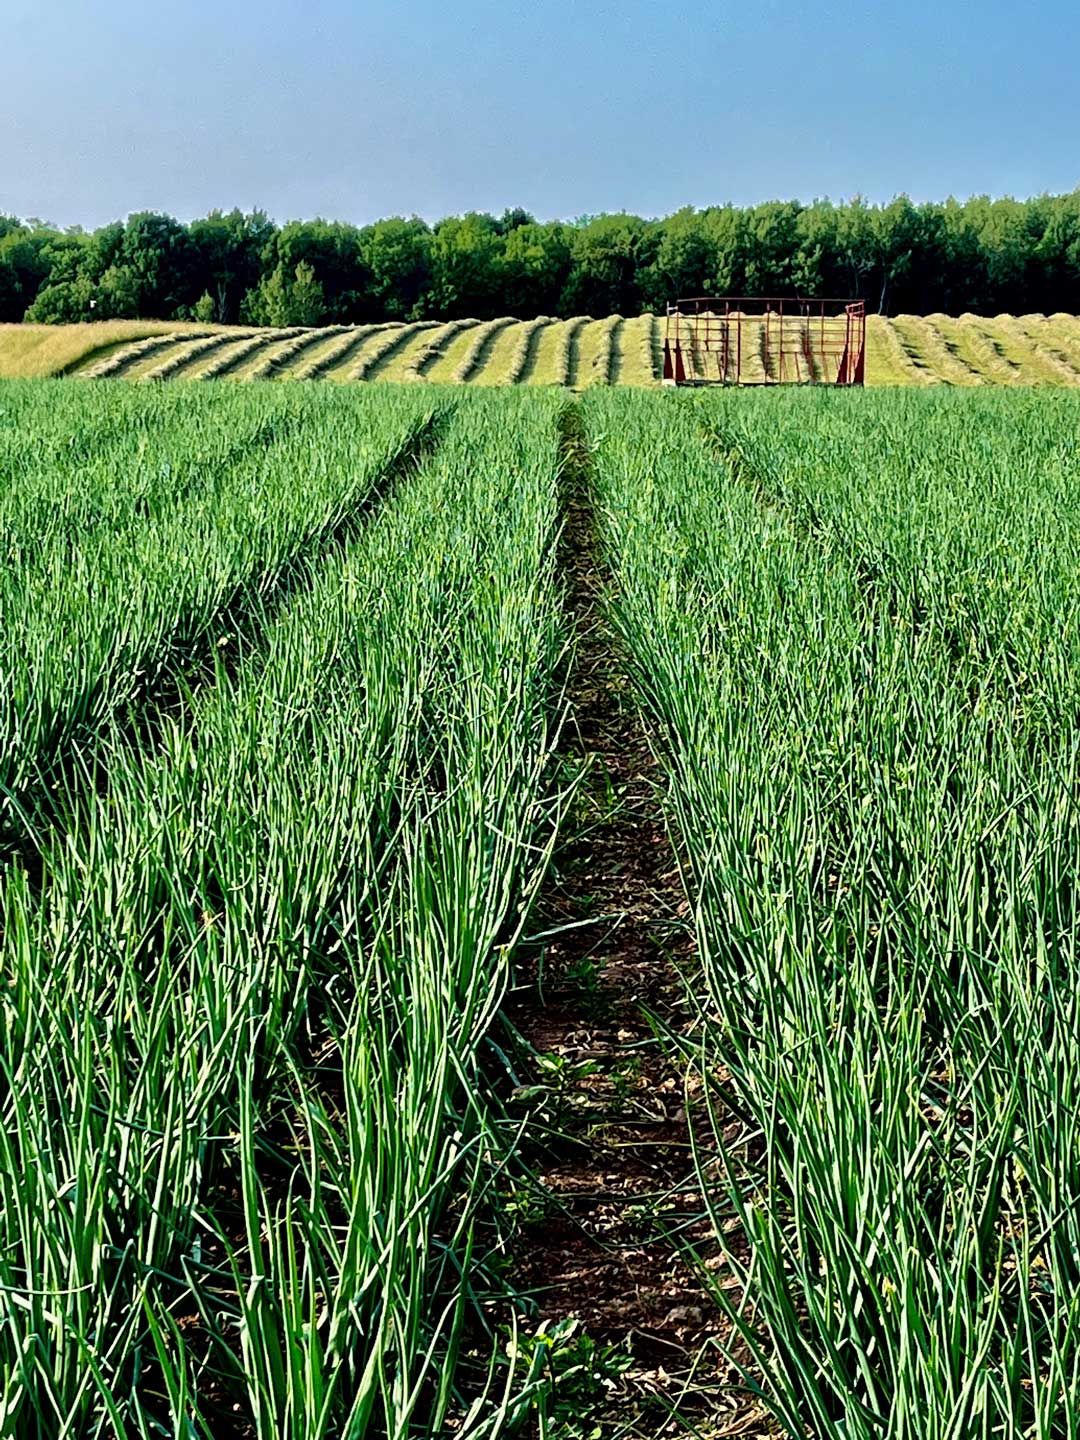 A field of green crops, possibly onions, with long neat rows stretching into the distance. In the background, there are harvested crops in rows and a red hay rake. A line of trees forms the horizon under a clear blue sky.